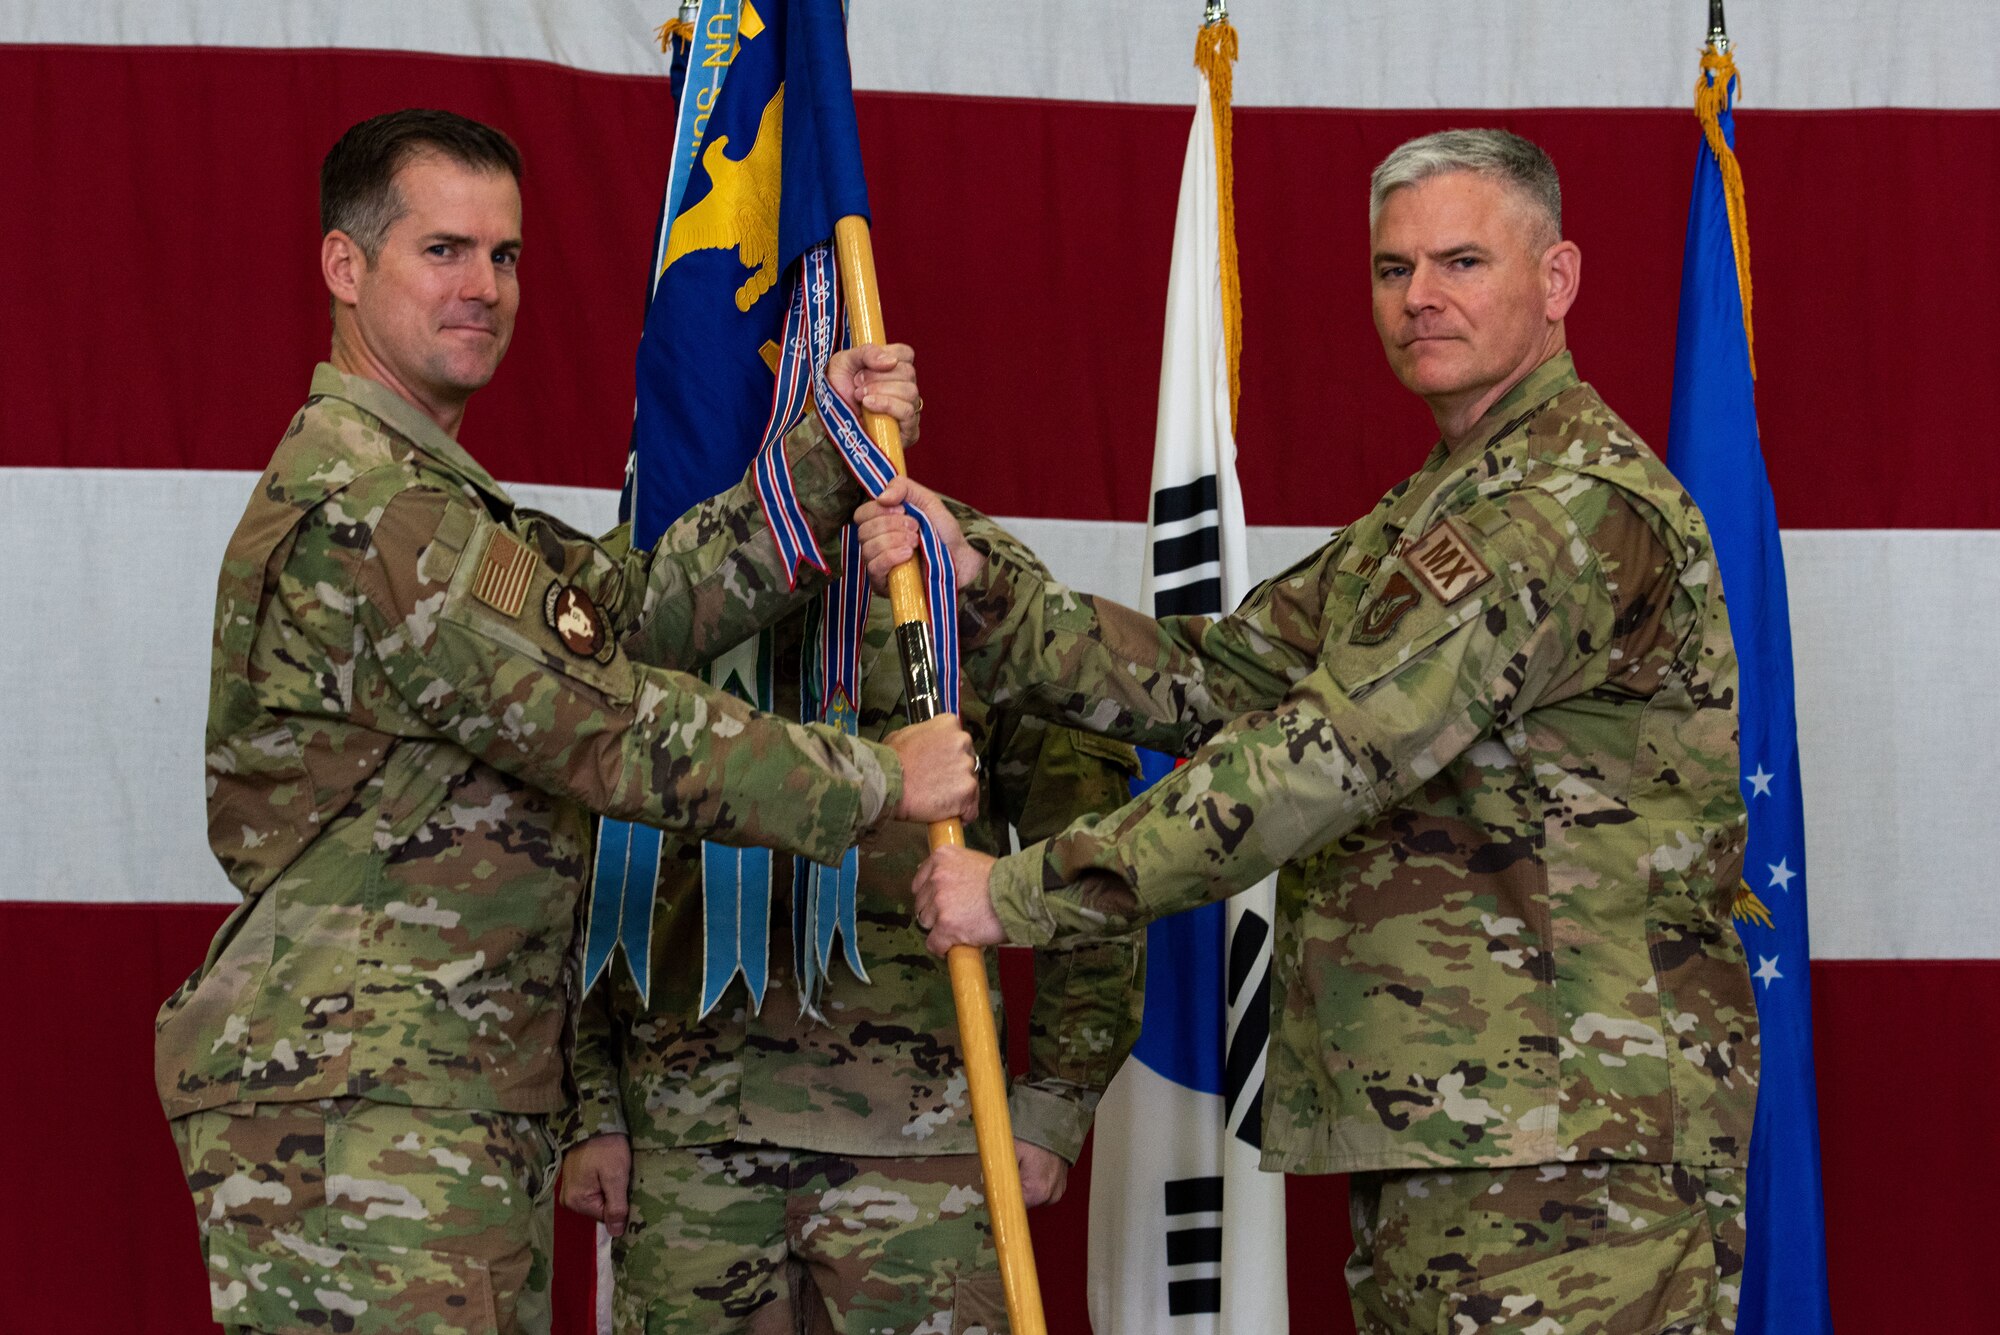 Col. Joshua Wood, 51st Fighter Wing commander, left, passes the guidon to Col. Todd Wydra, 51st Maintenance Group incoming commander, as a symbol of his taking command of the MXG at Osan Air Base, Republic of Korea, June 15, 2022.